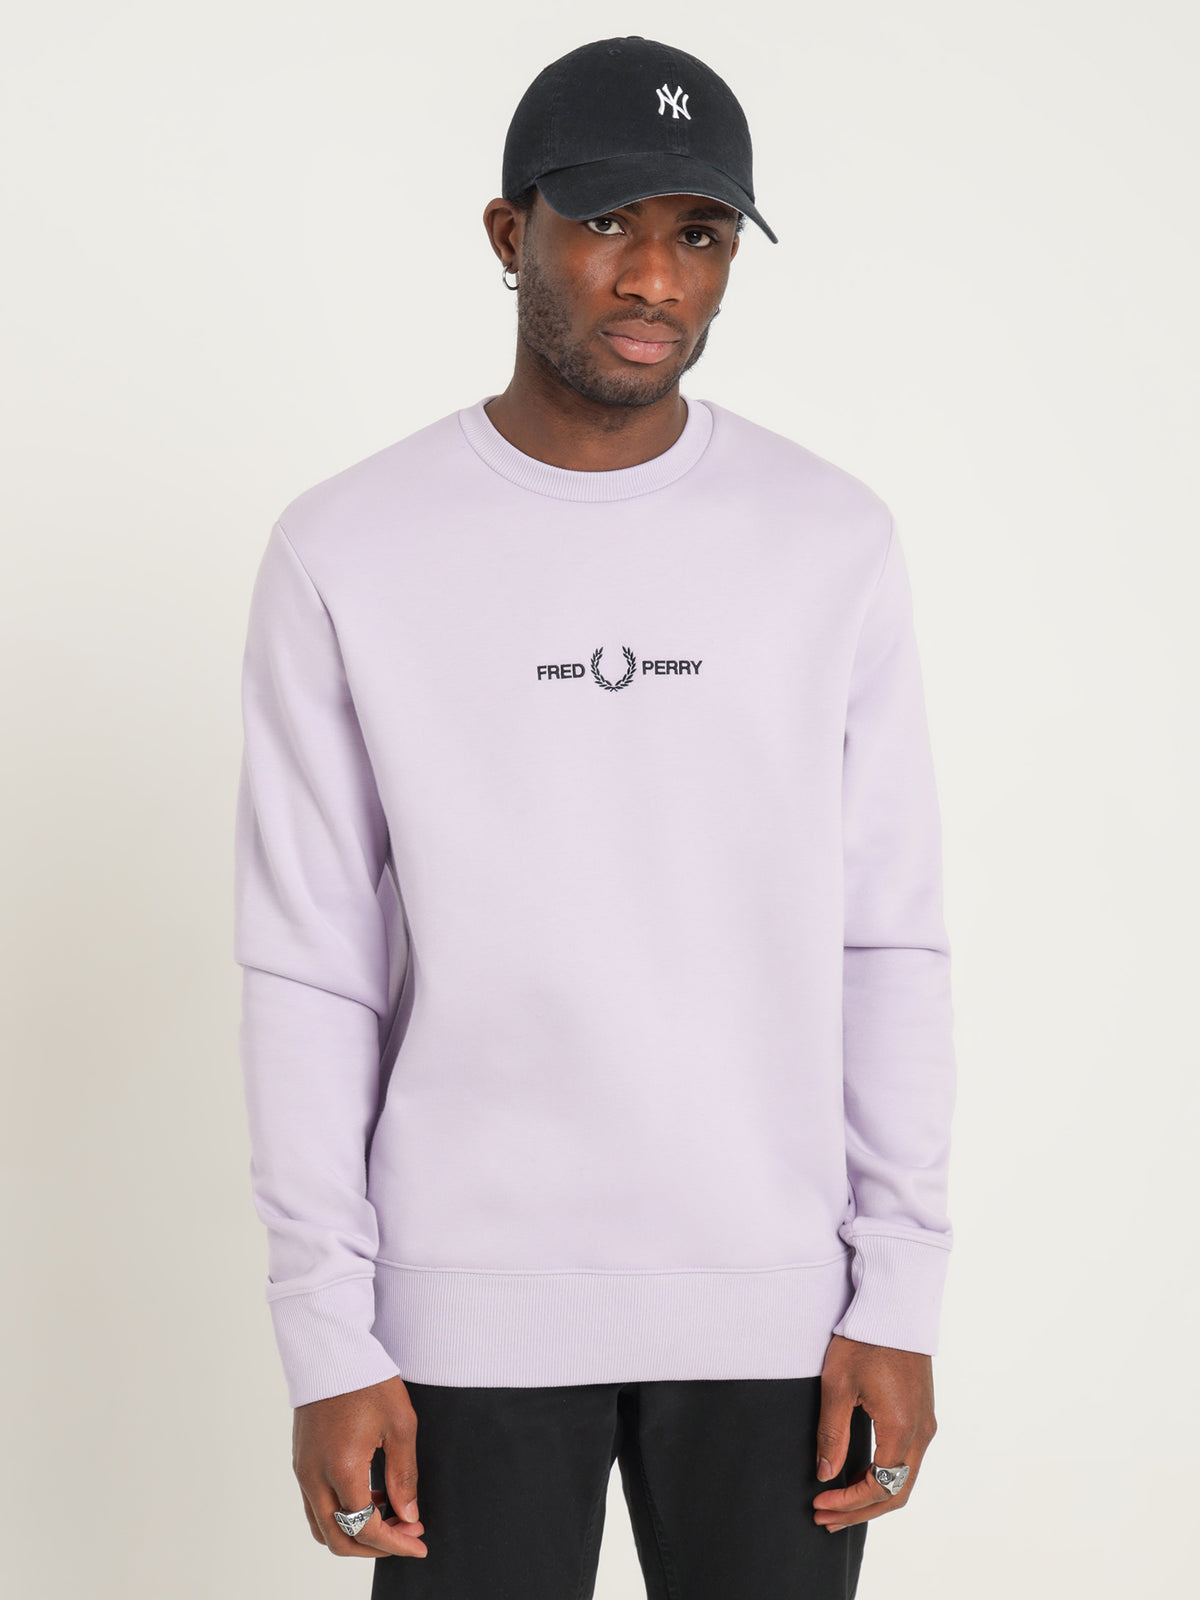 Embroidered Sweatshirt in Lilac Soul